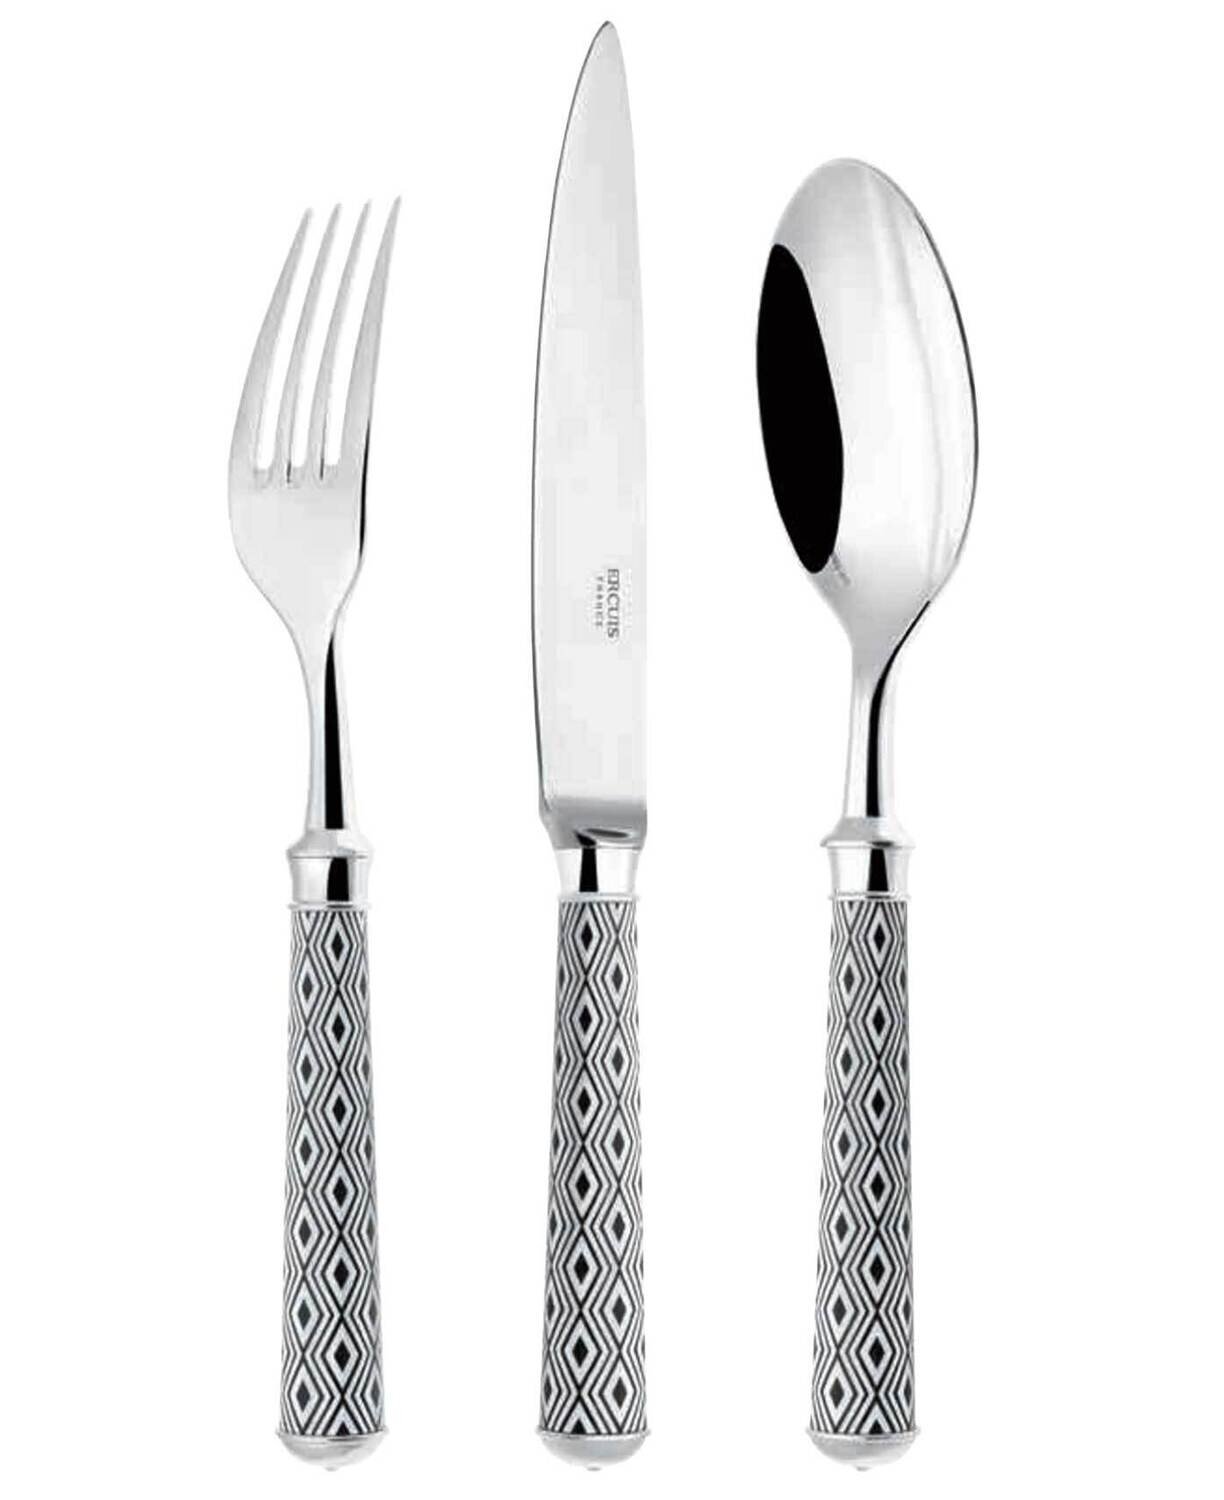 Ercuis Arlequin Black Dessert Fork 7.5 Inch Silver Plated Part Golded F602541-05